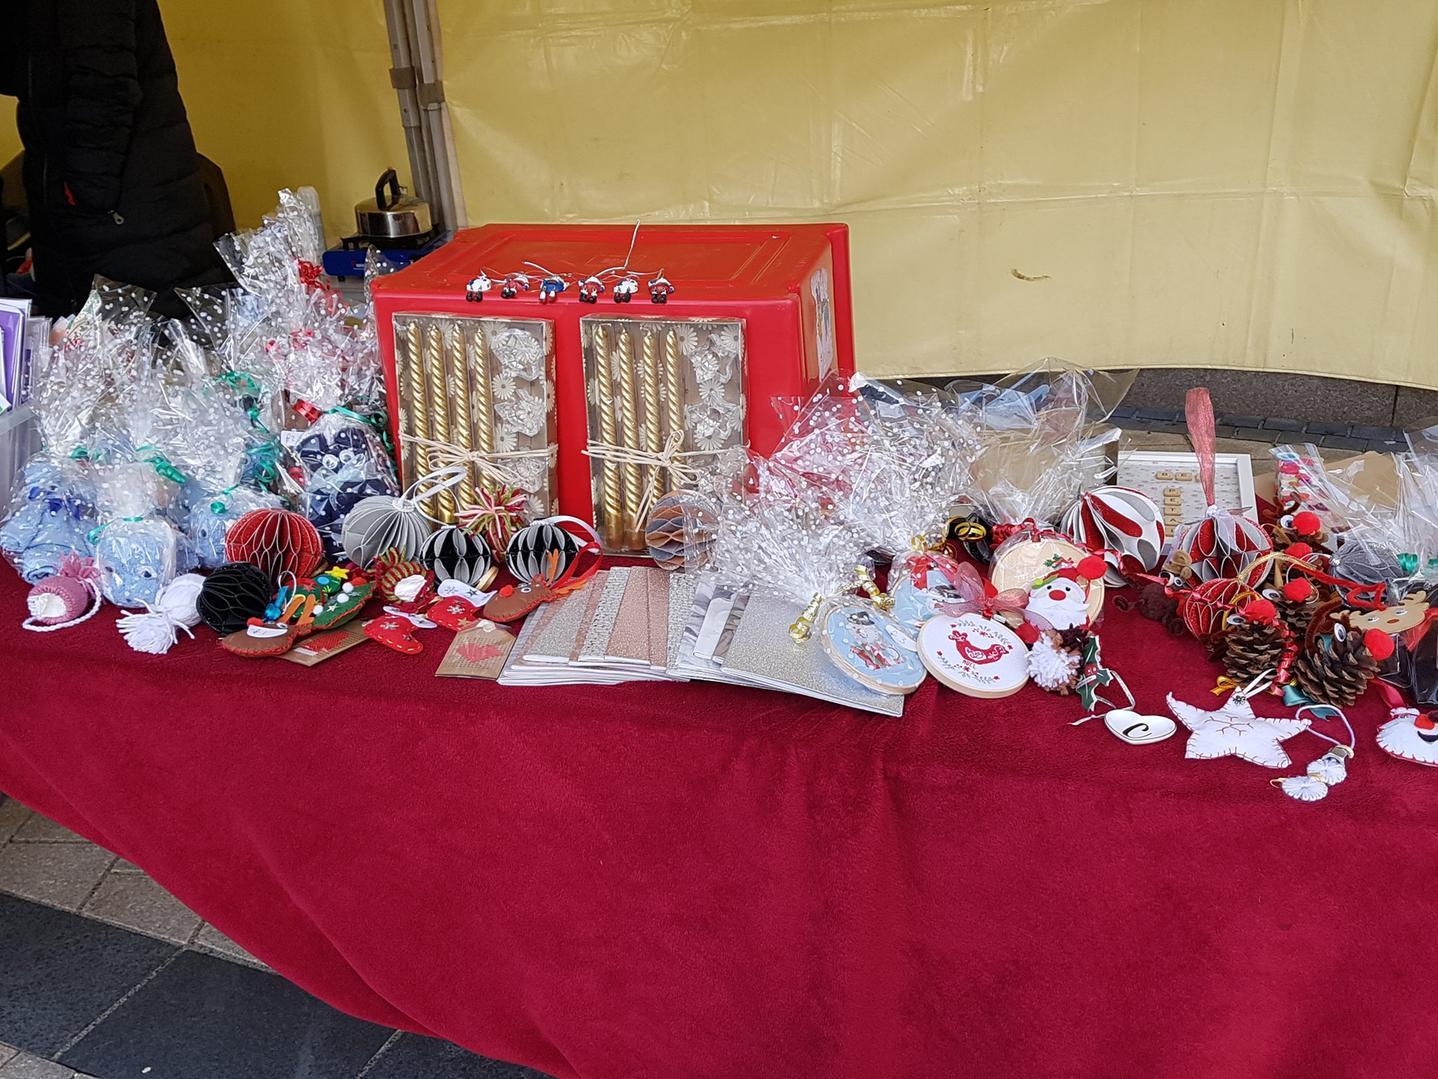 This stall from The CE Academy was raising money for Macmillan with handmade items. They were also running a tombola.